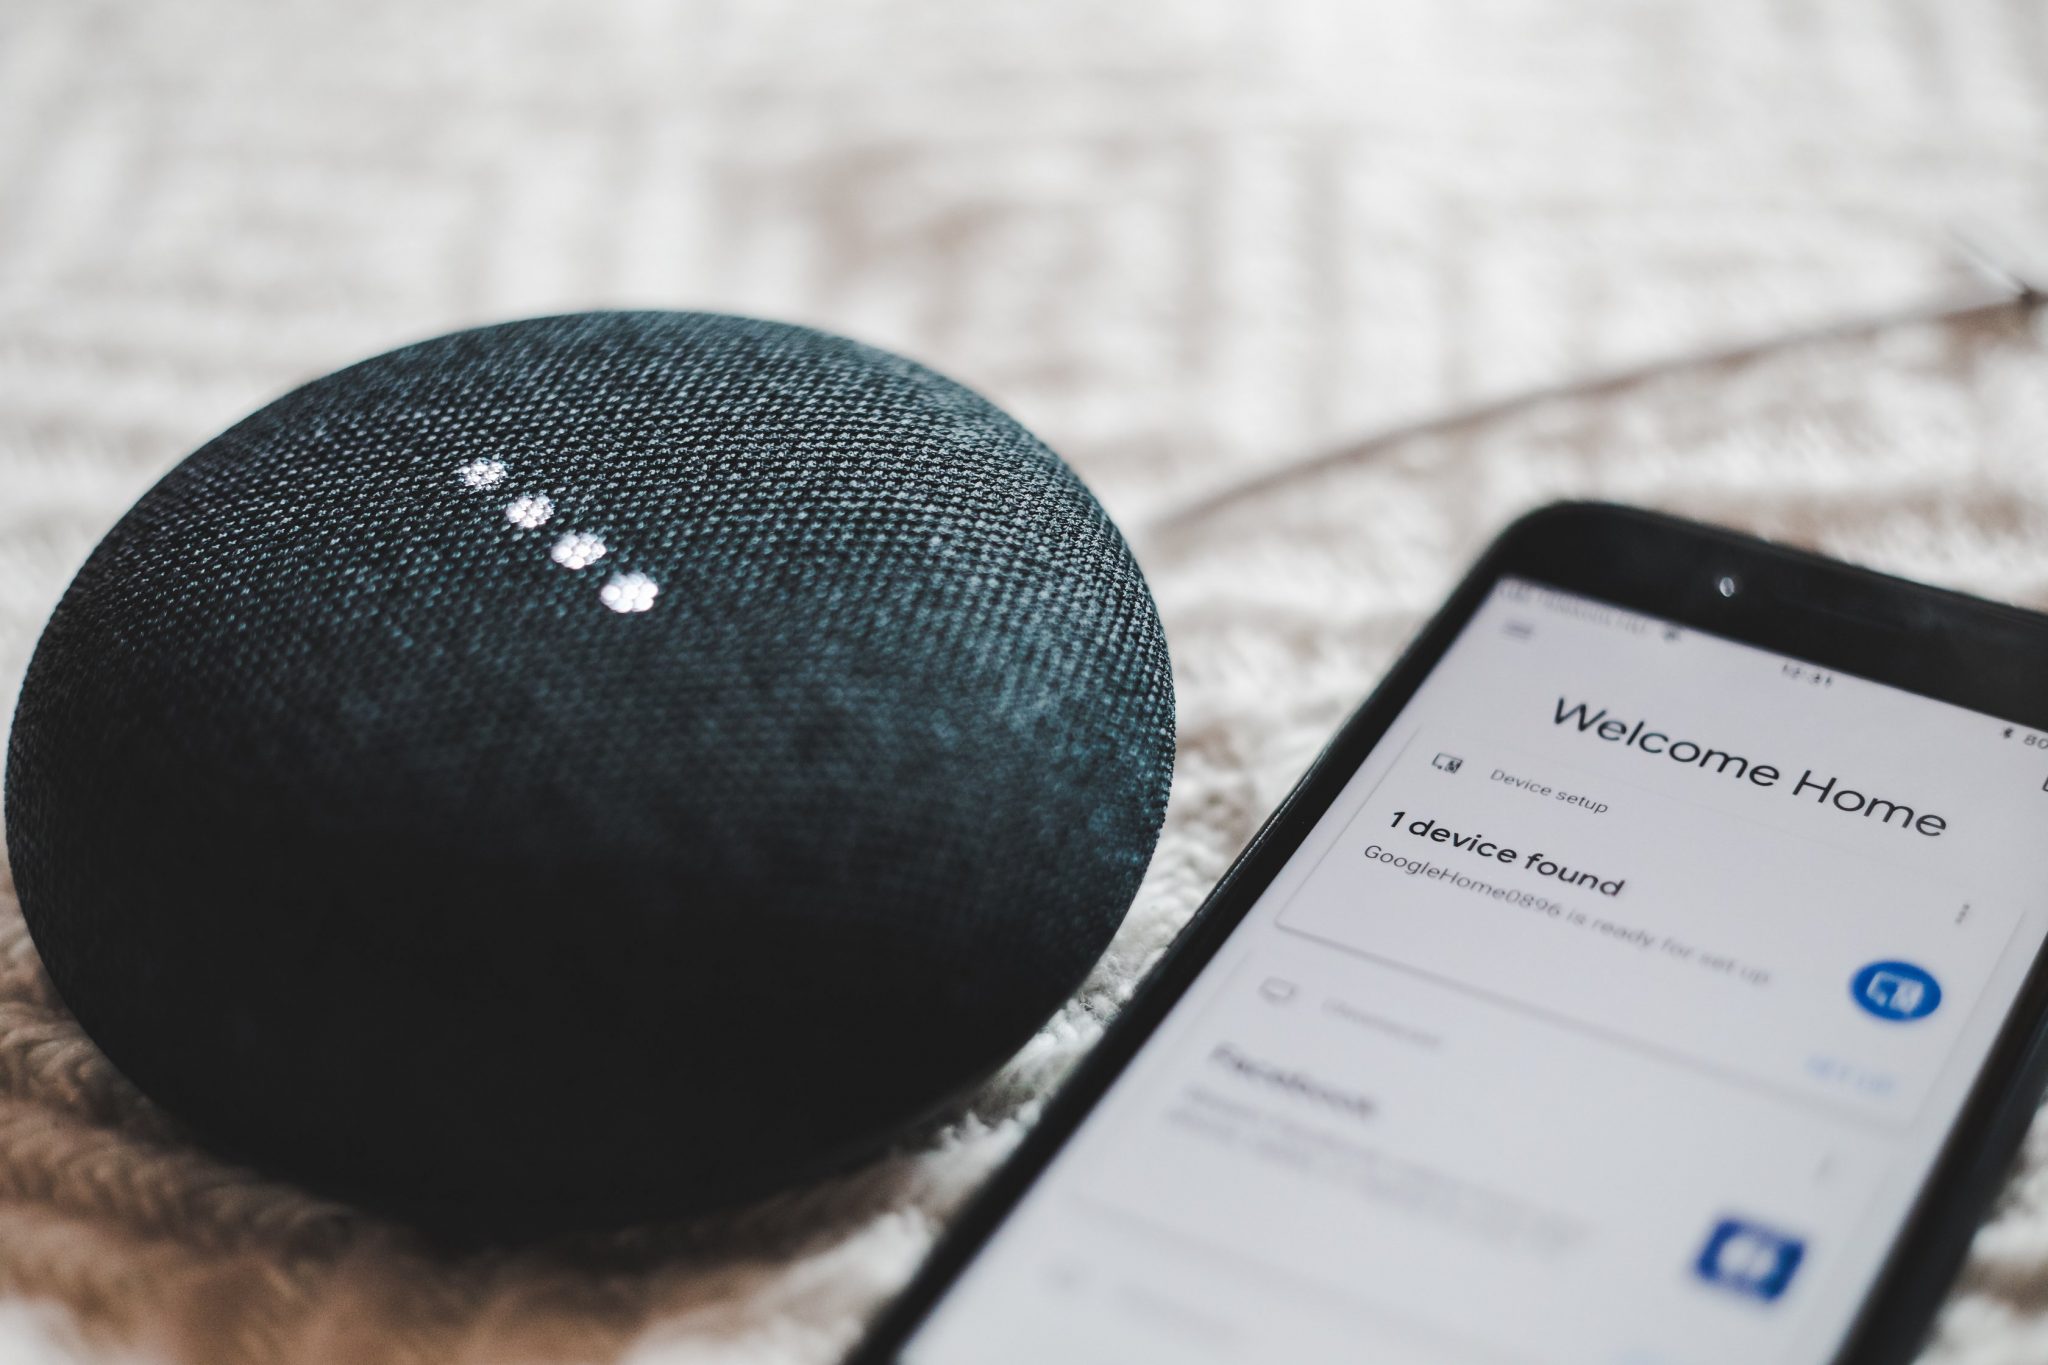 Canadian Spotify Premium Users Can Get A Free Google Home Mini